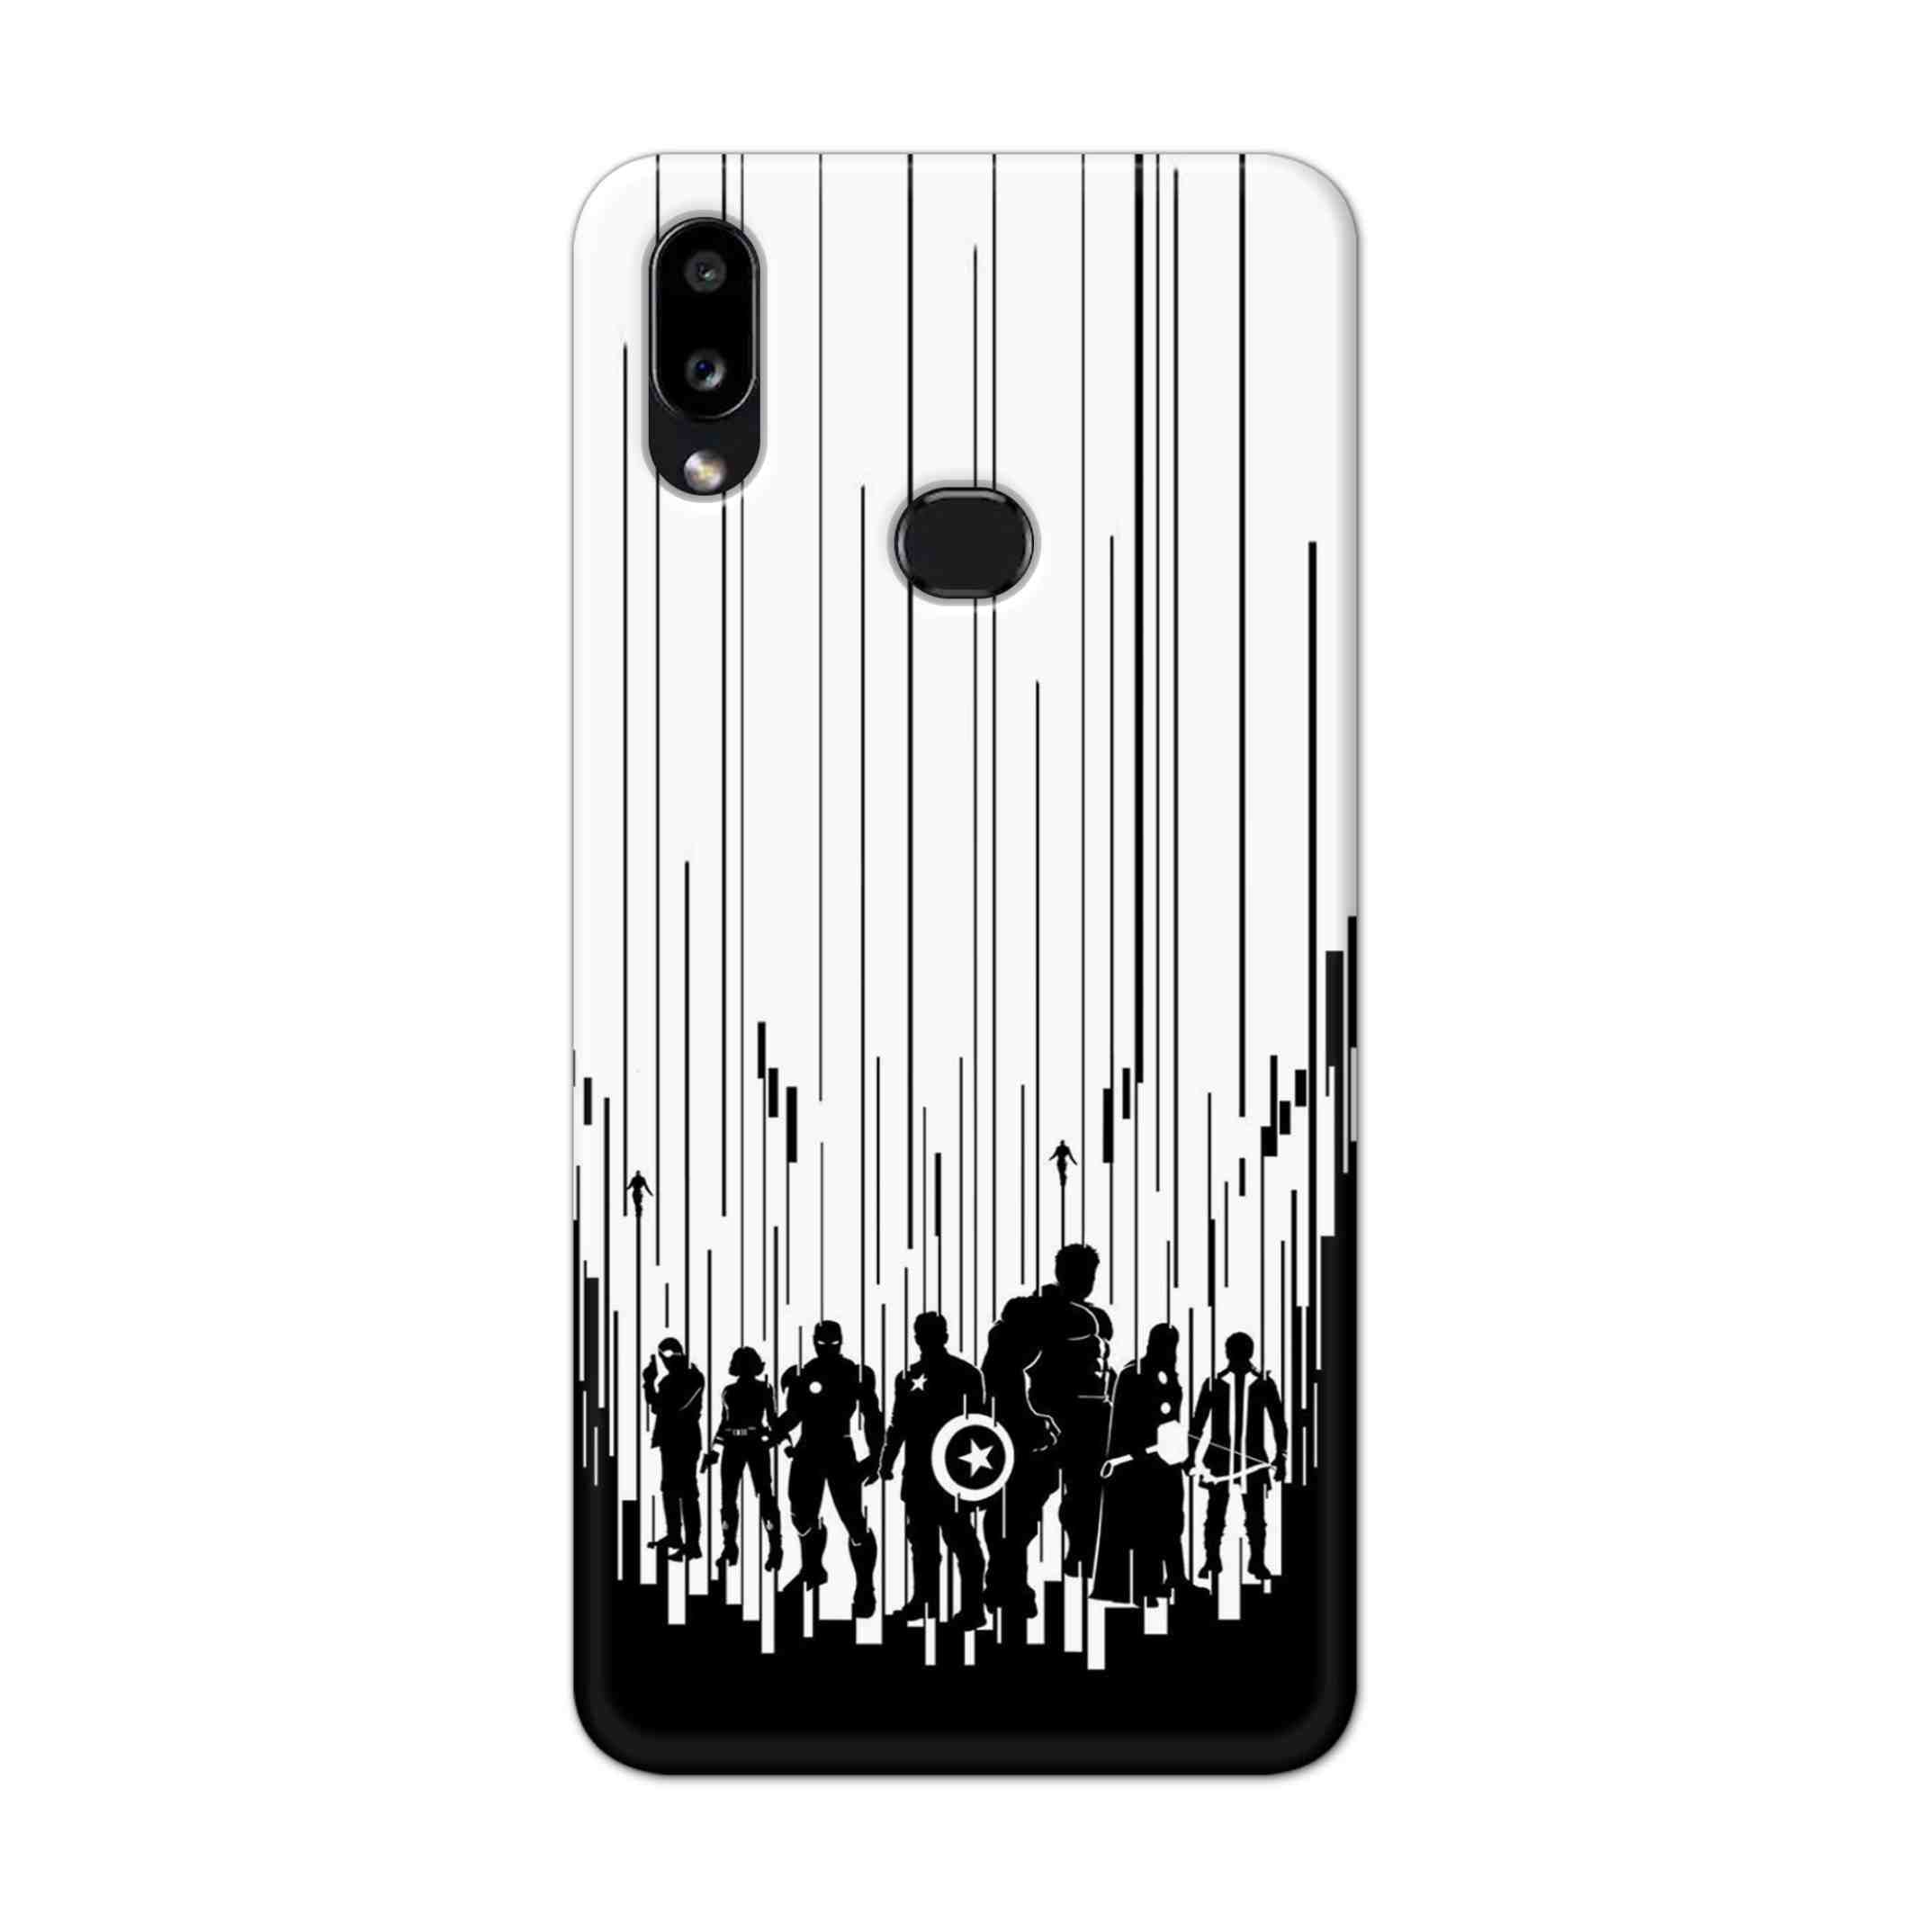 Buy Black And White Avengers Hard Back Mobile Phone Case Cover For Samsung Galaxy M01s Online